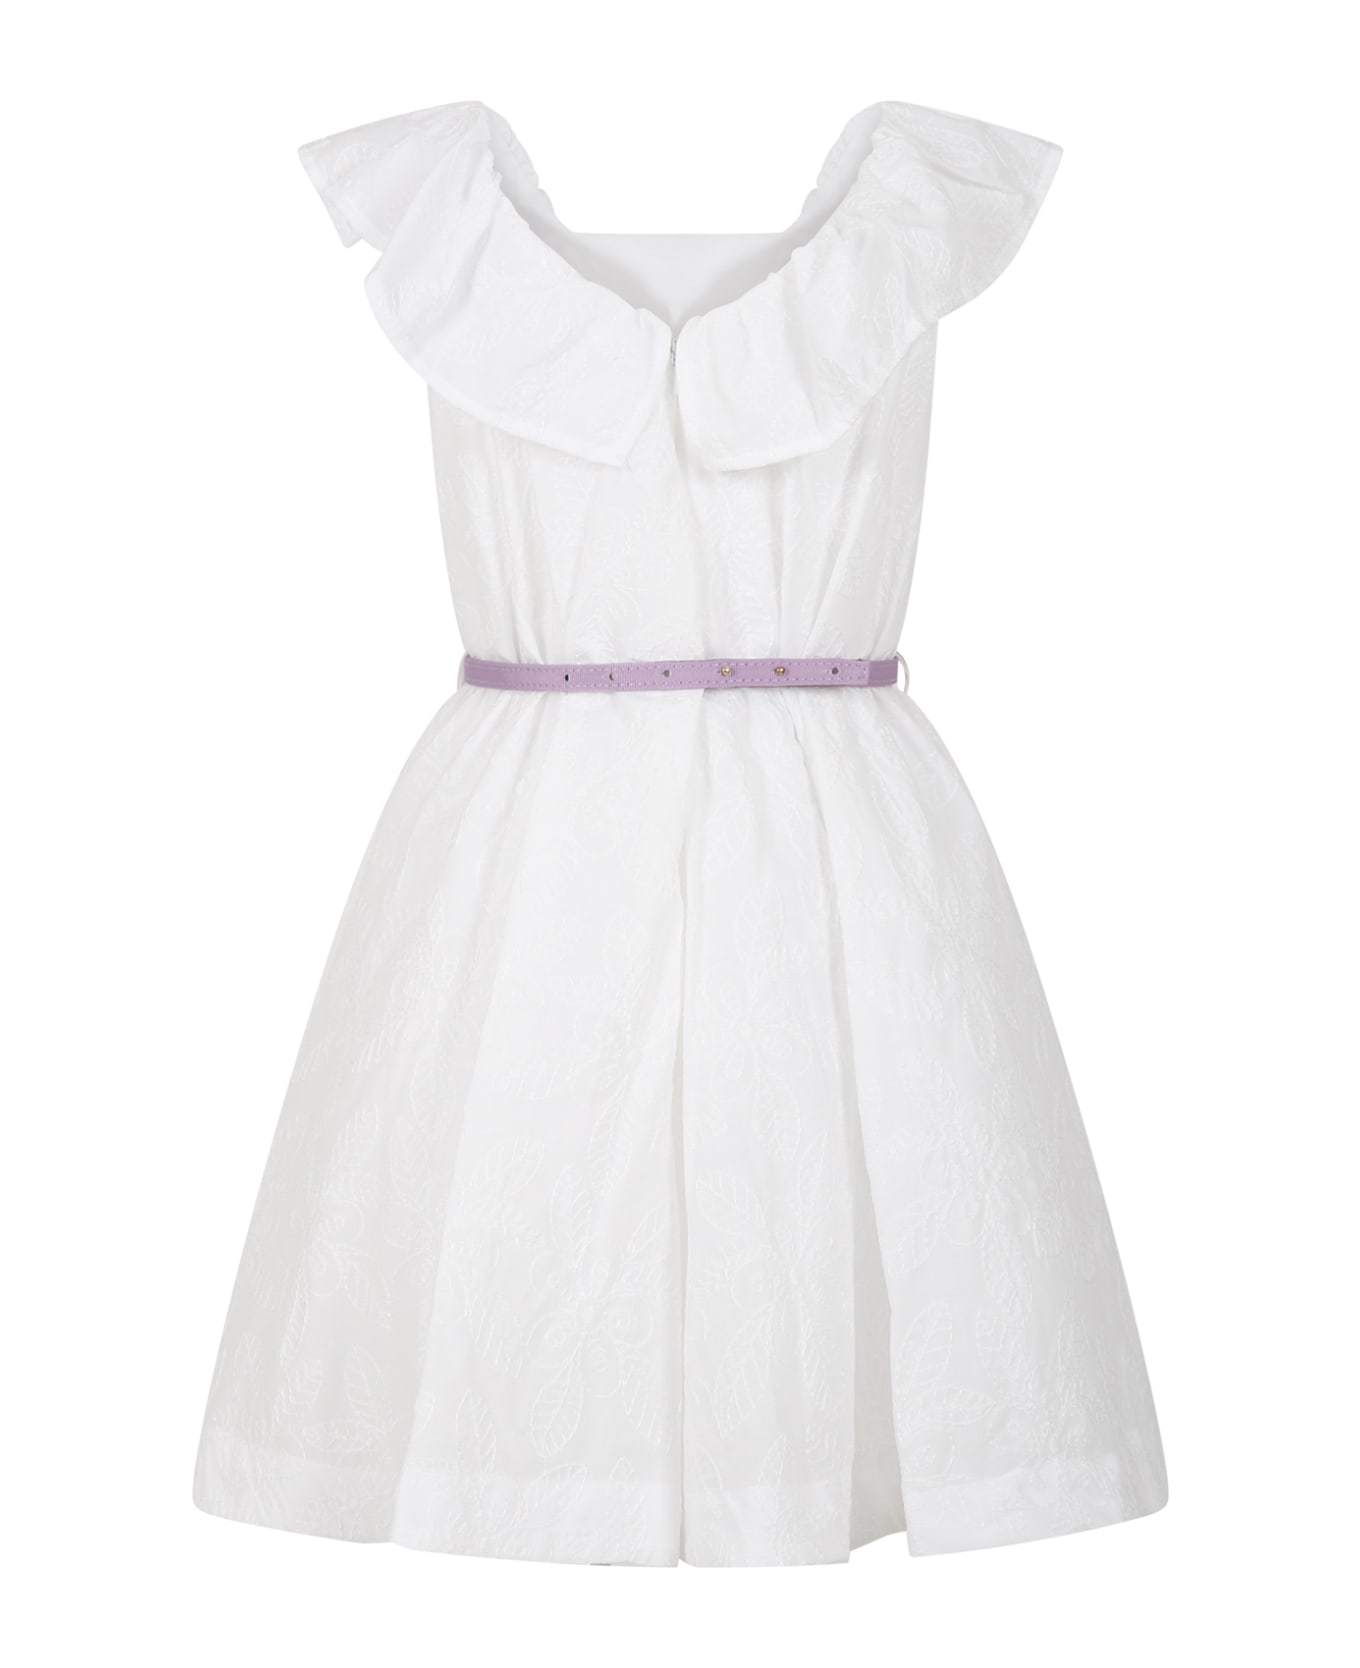 Monnalisa White Dress For Girl With Flowers - White